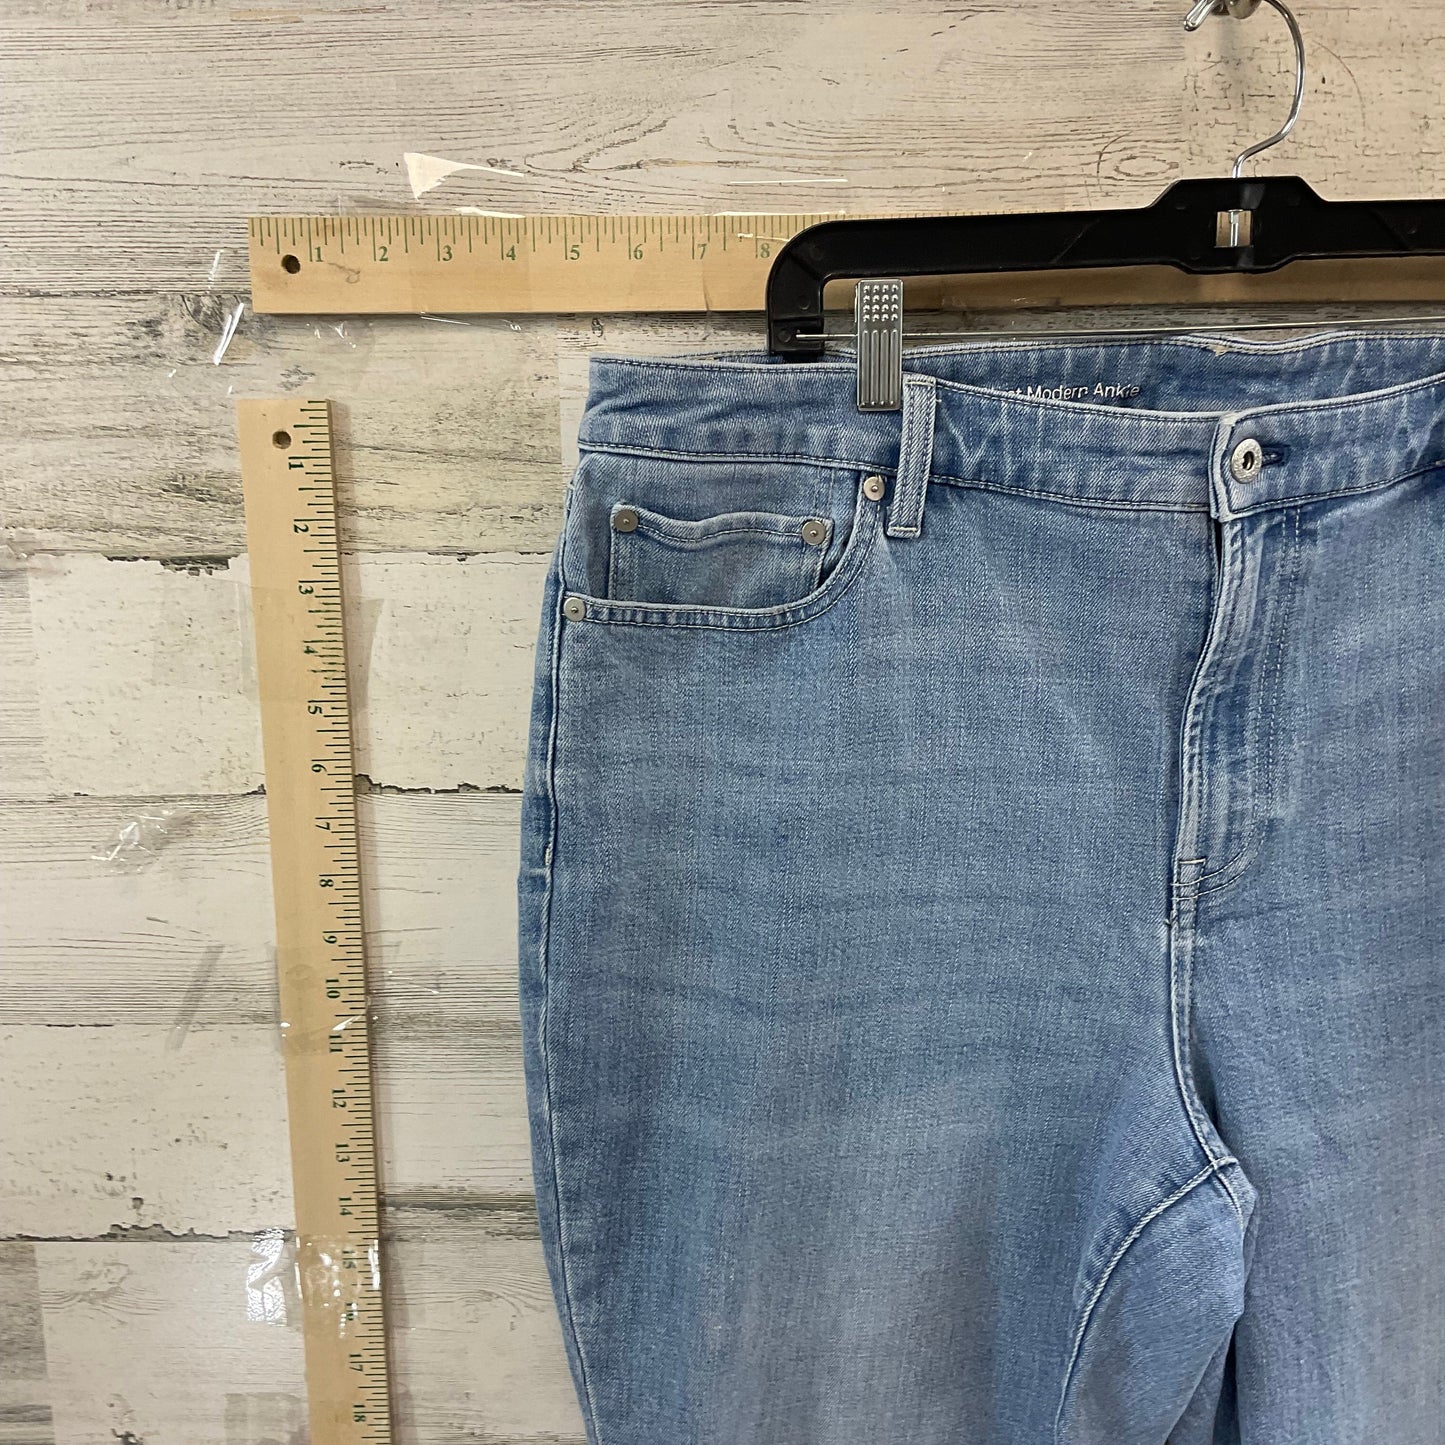 Jeans Cropped By Talbots  Size: 18